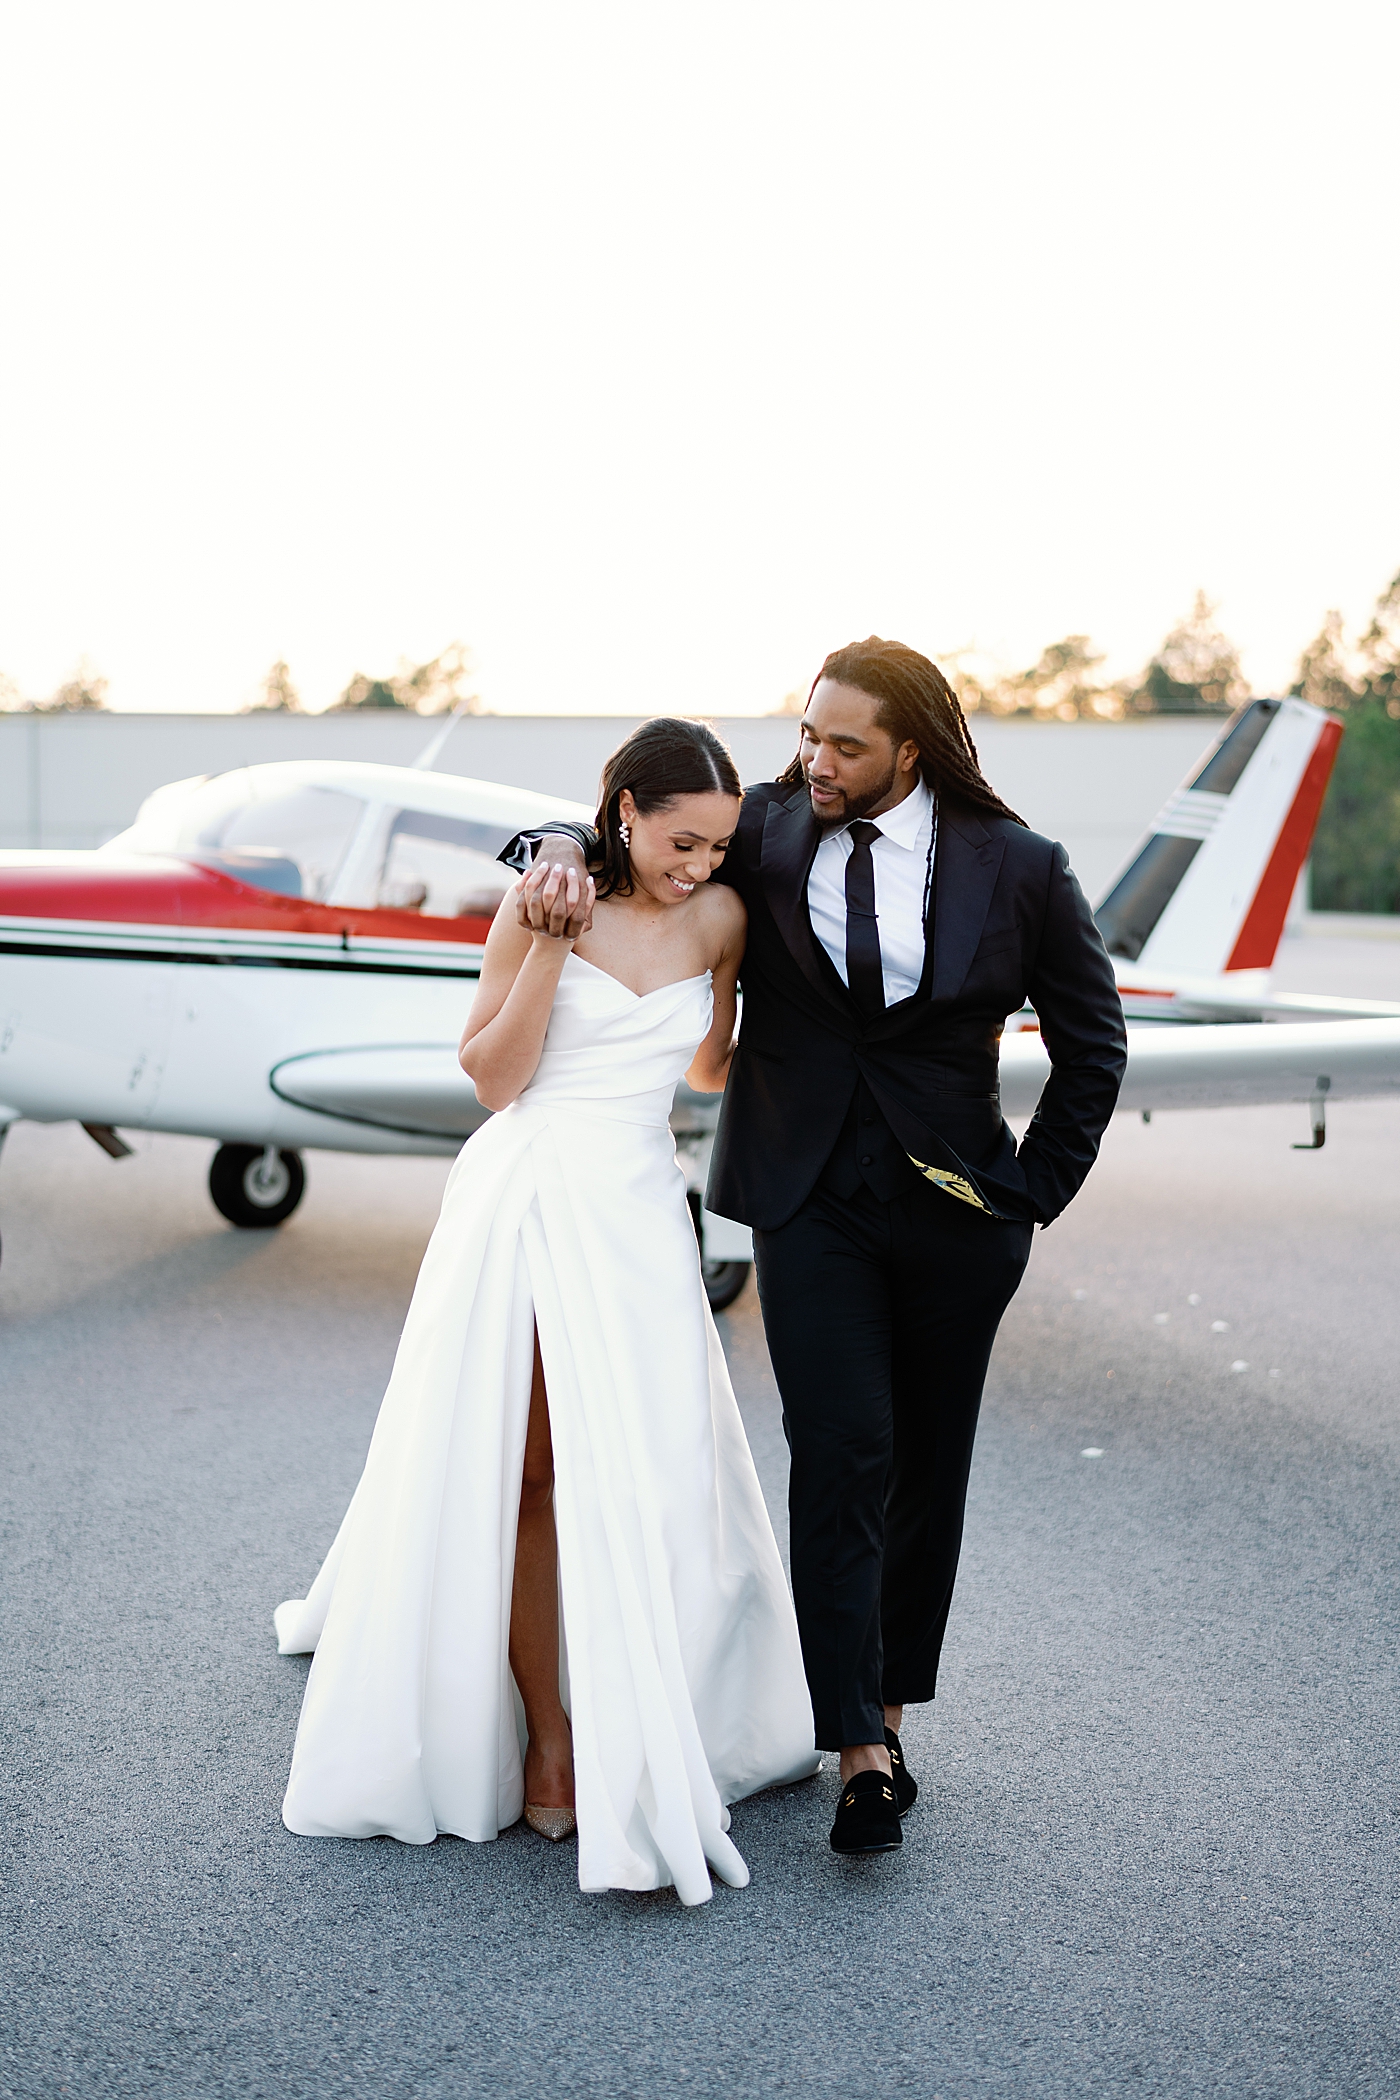 Bride and groom walking with an airplane in the background | Image by Annie Laura Photo